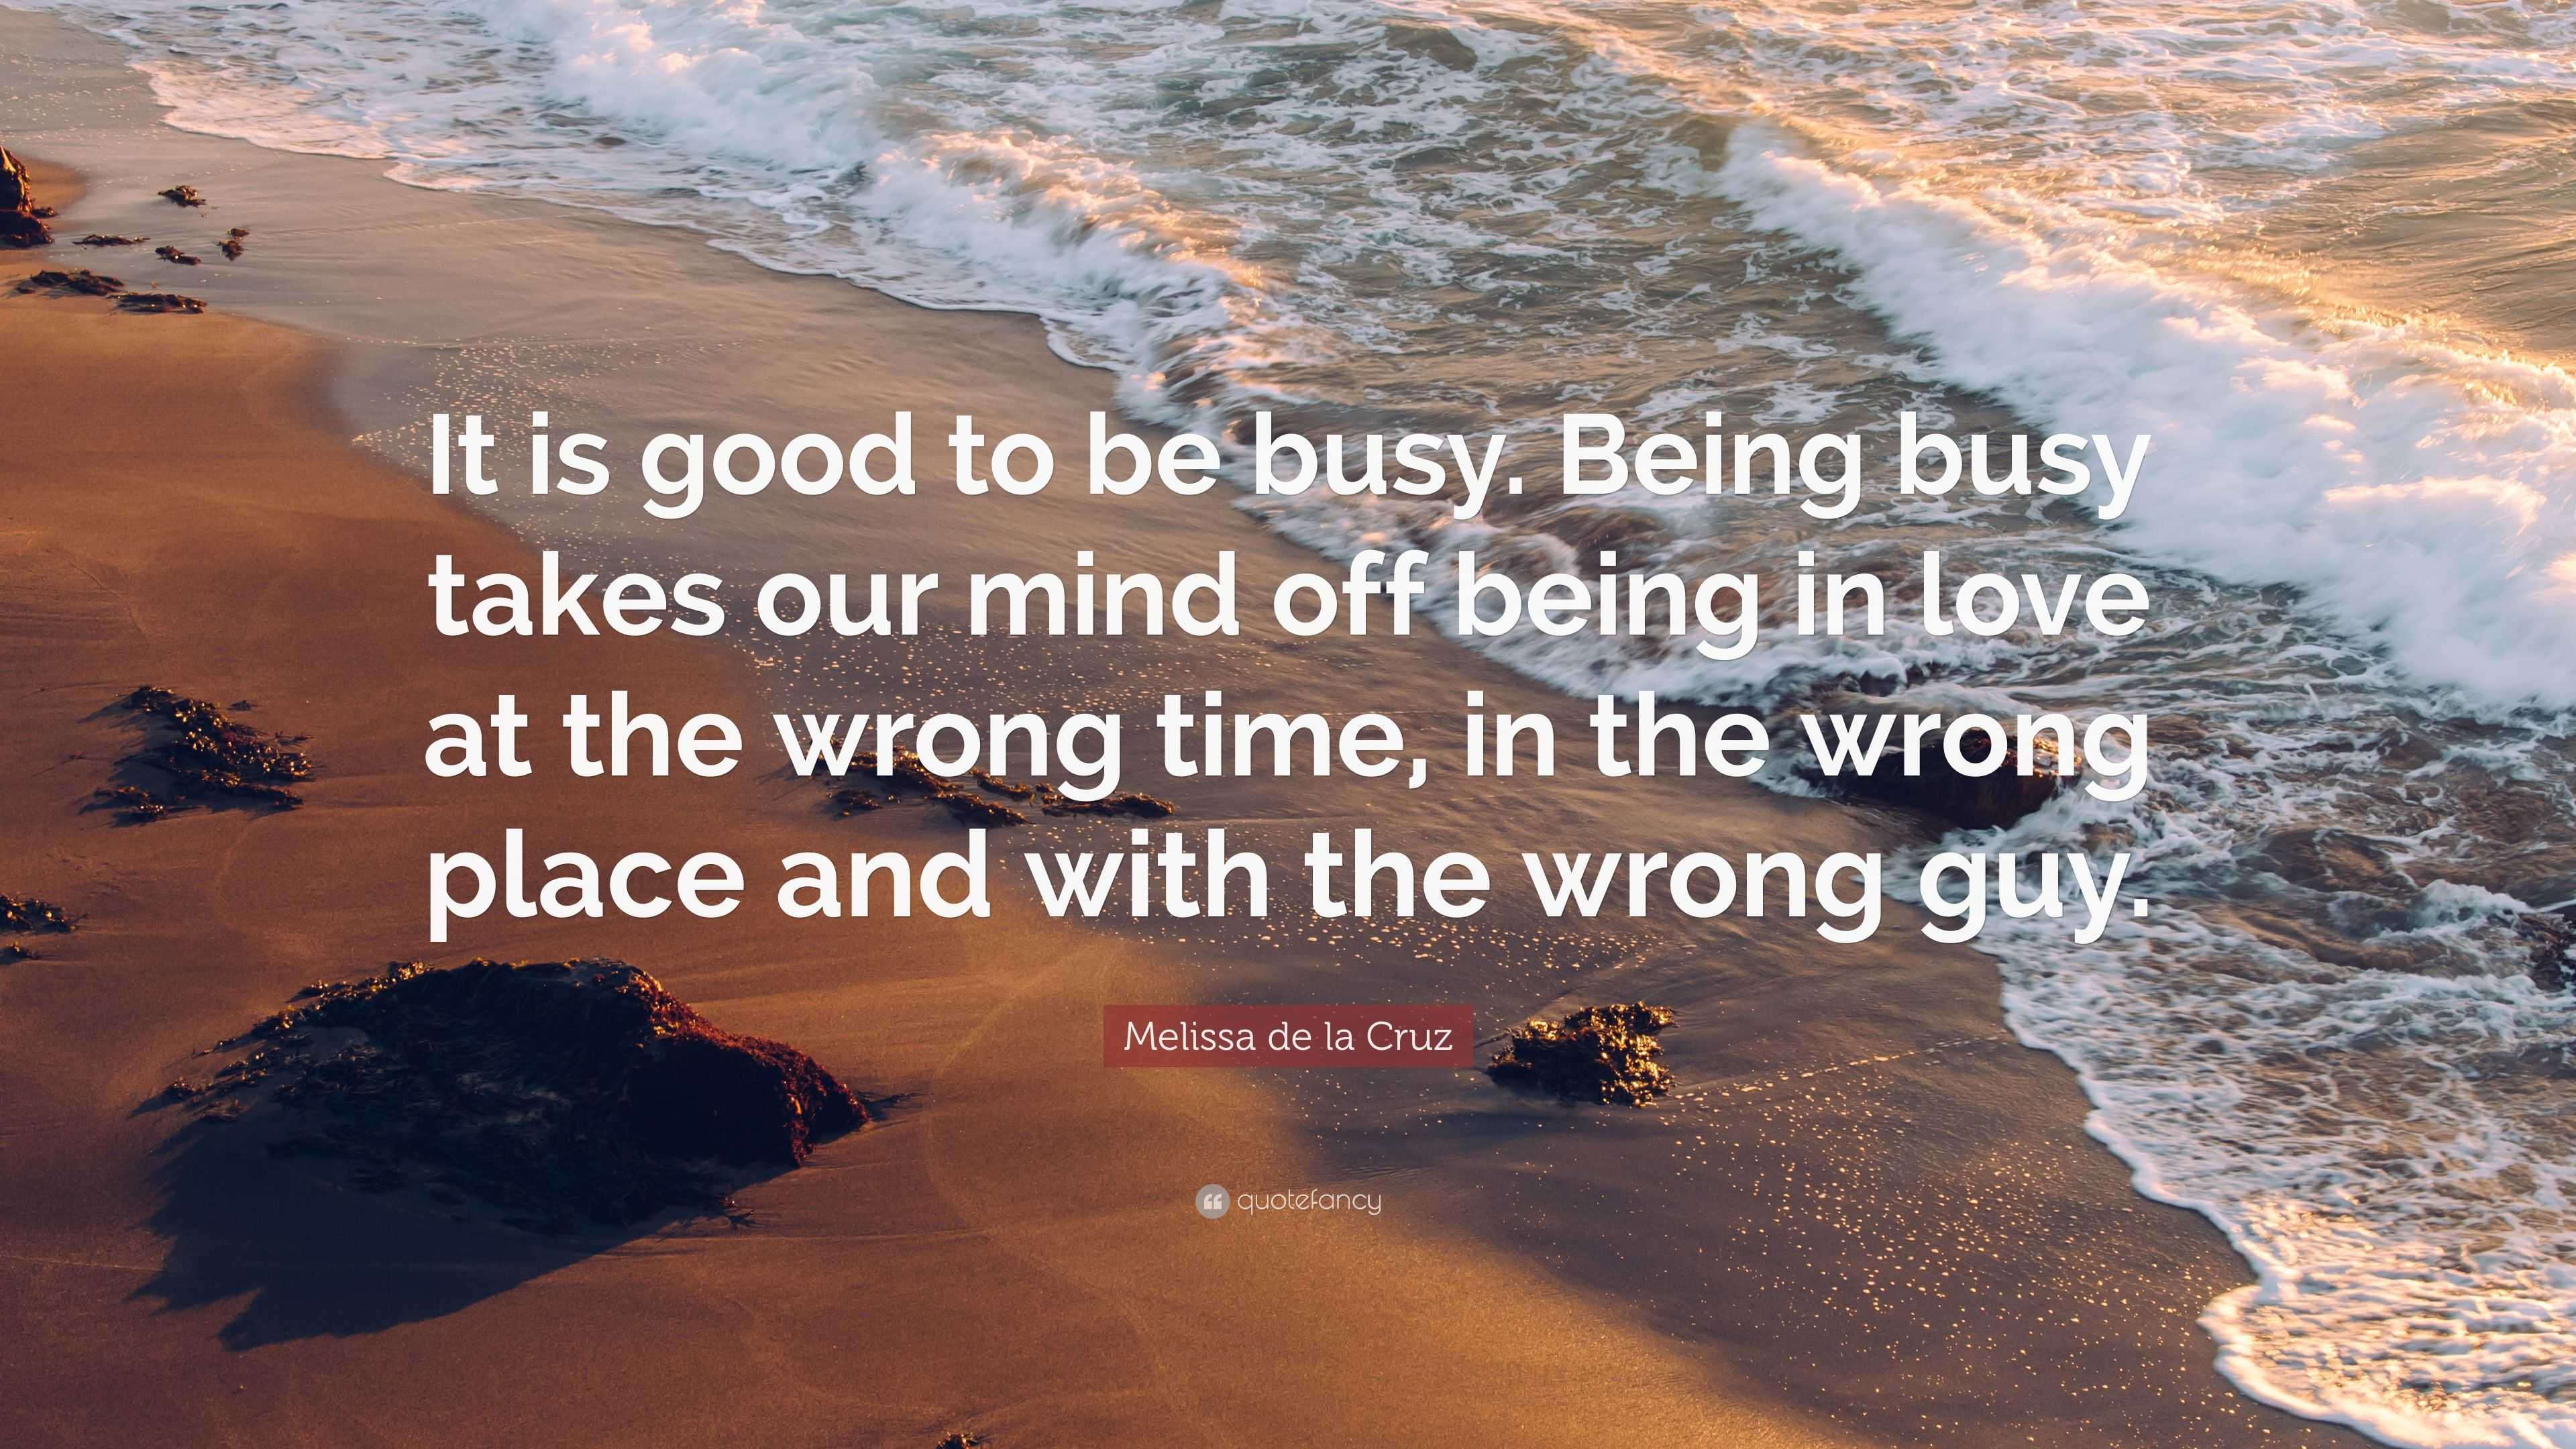 Melissa de la Cruz Quote: “It is good to be busy. Being busy takes our mind  off being in love at the wrong time, in the wrong place and with the wr”